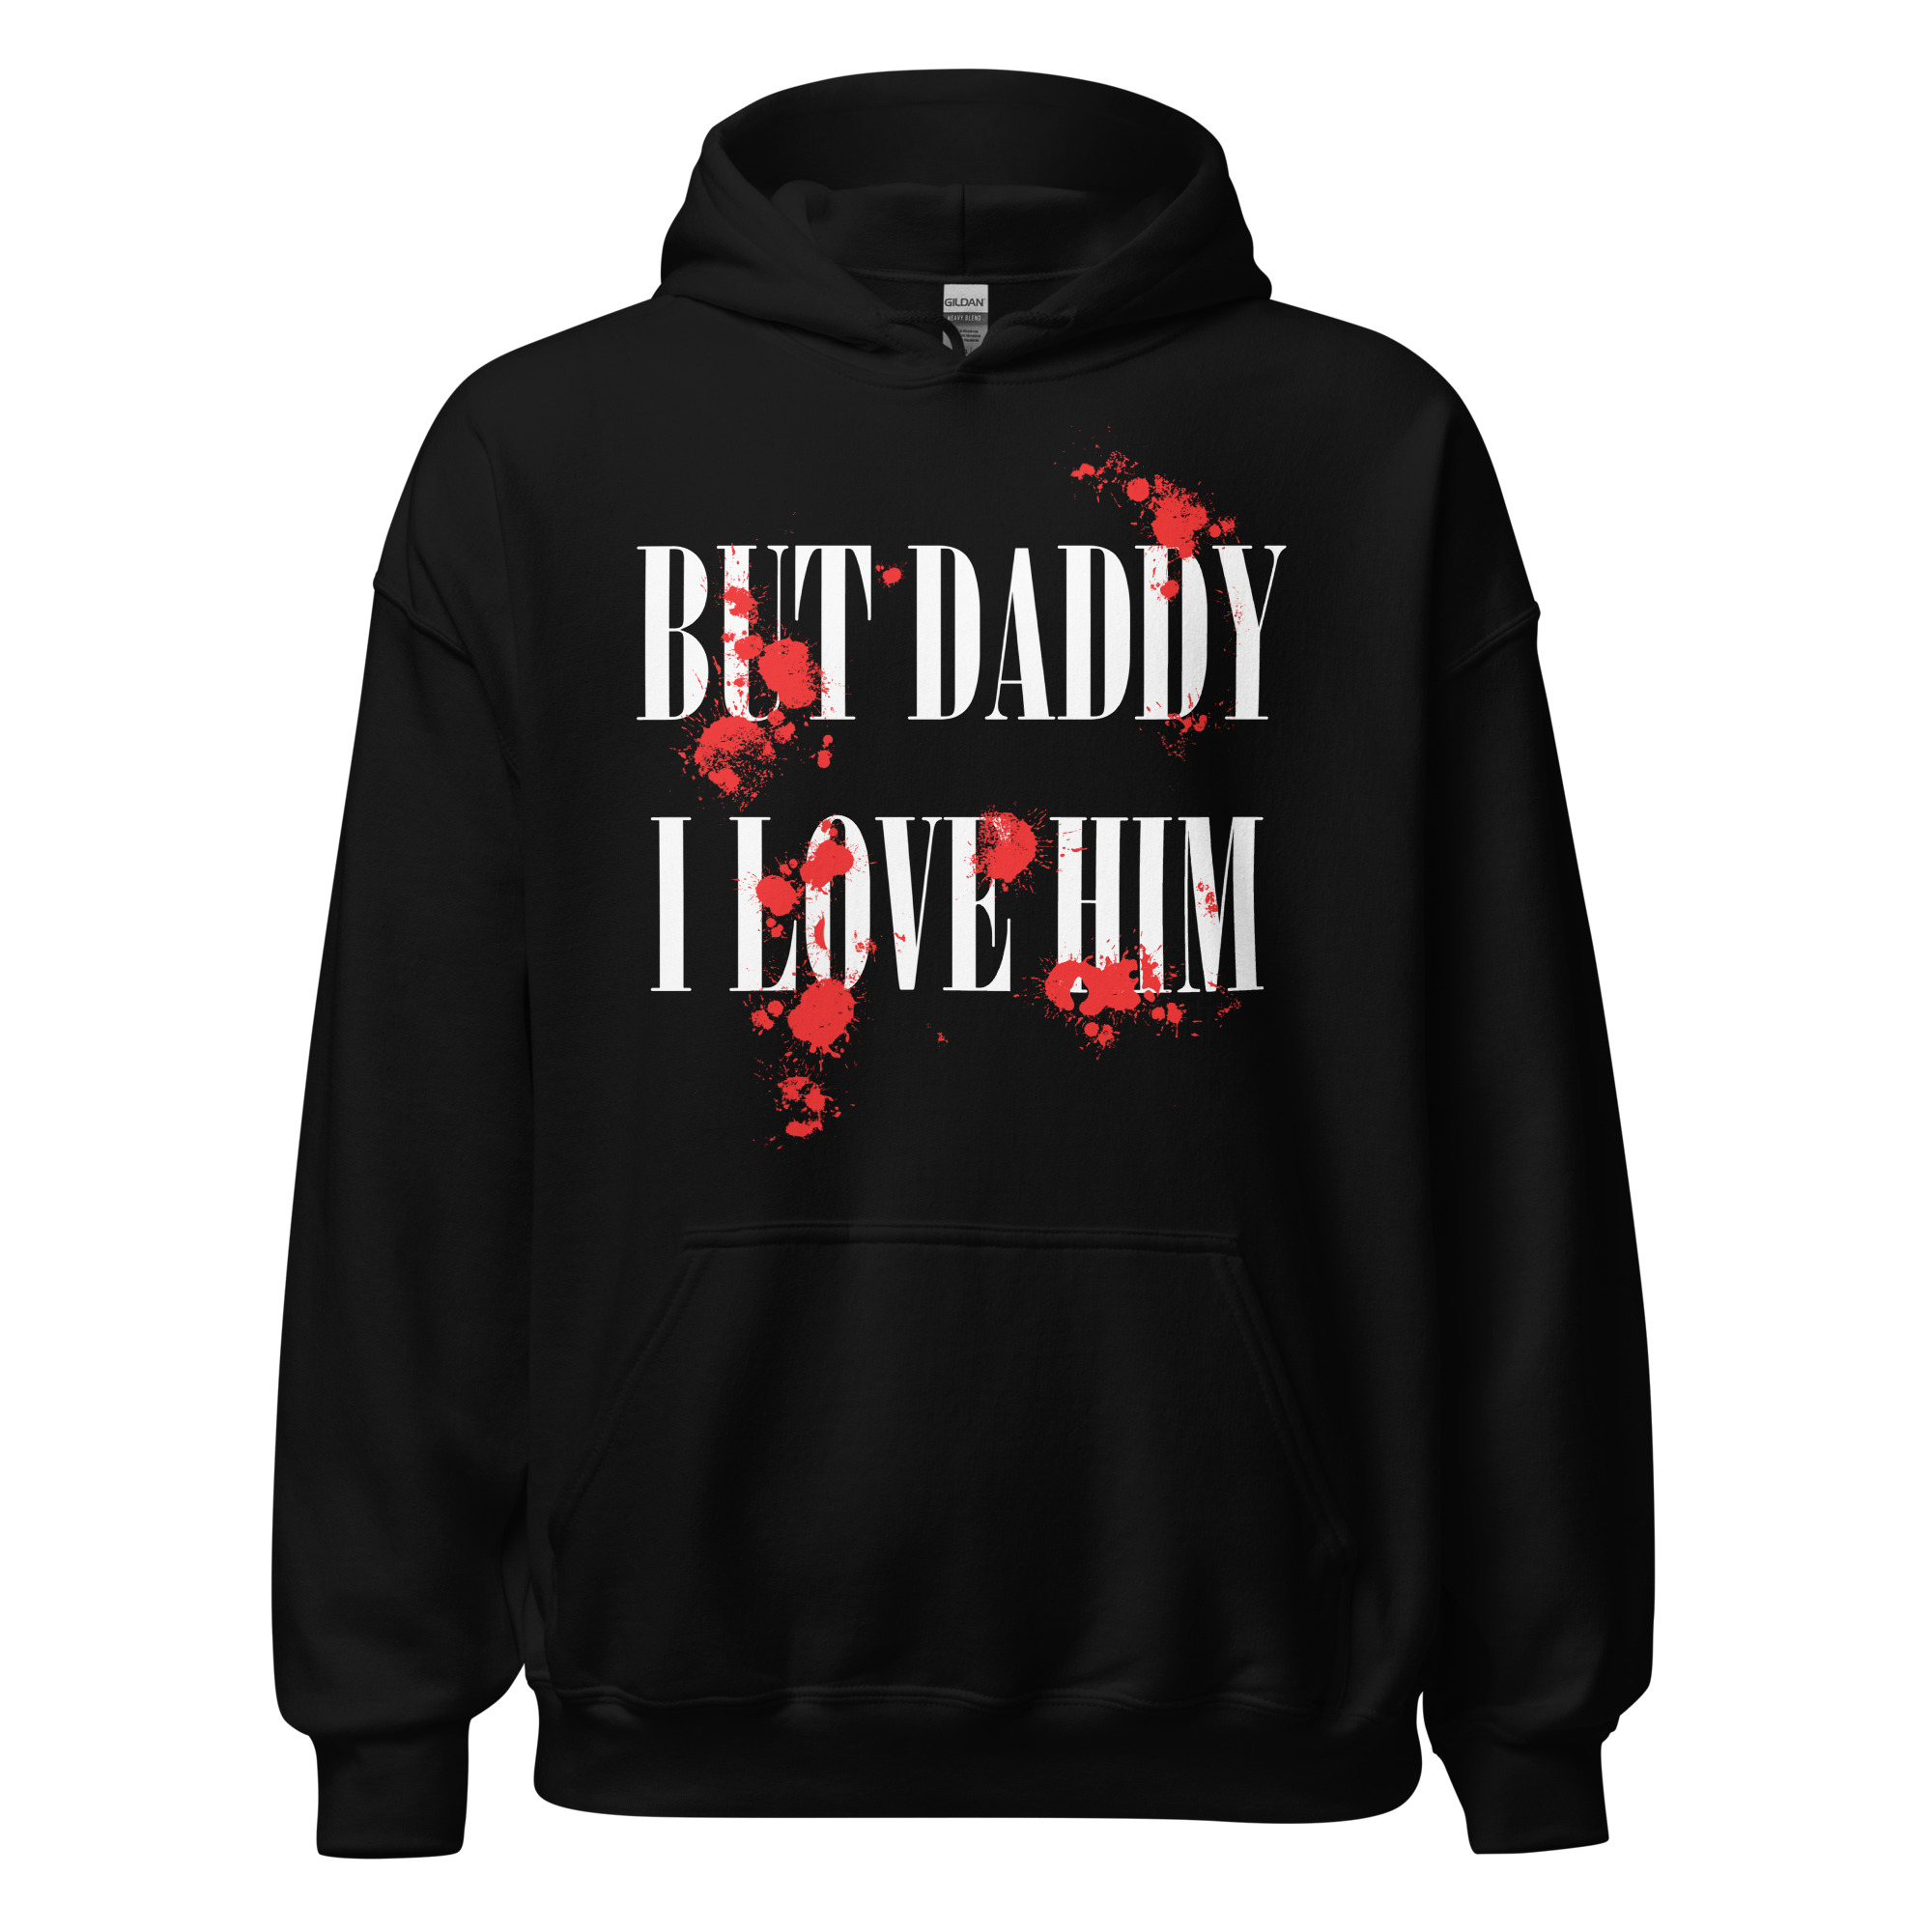 Featured image for “But Daddy I love him - Unisex Gildan Hoodie”